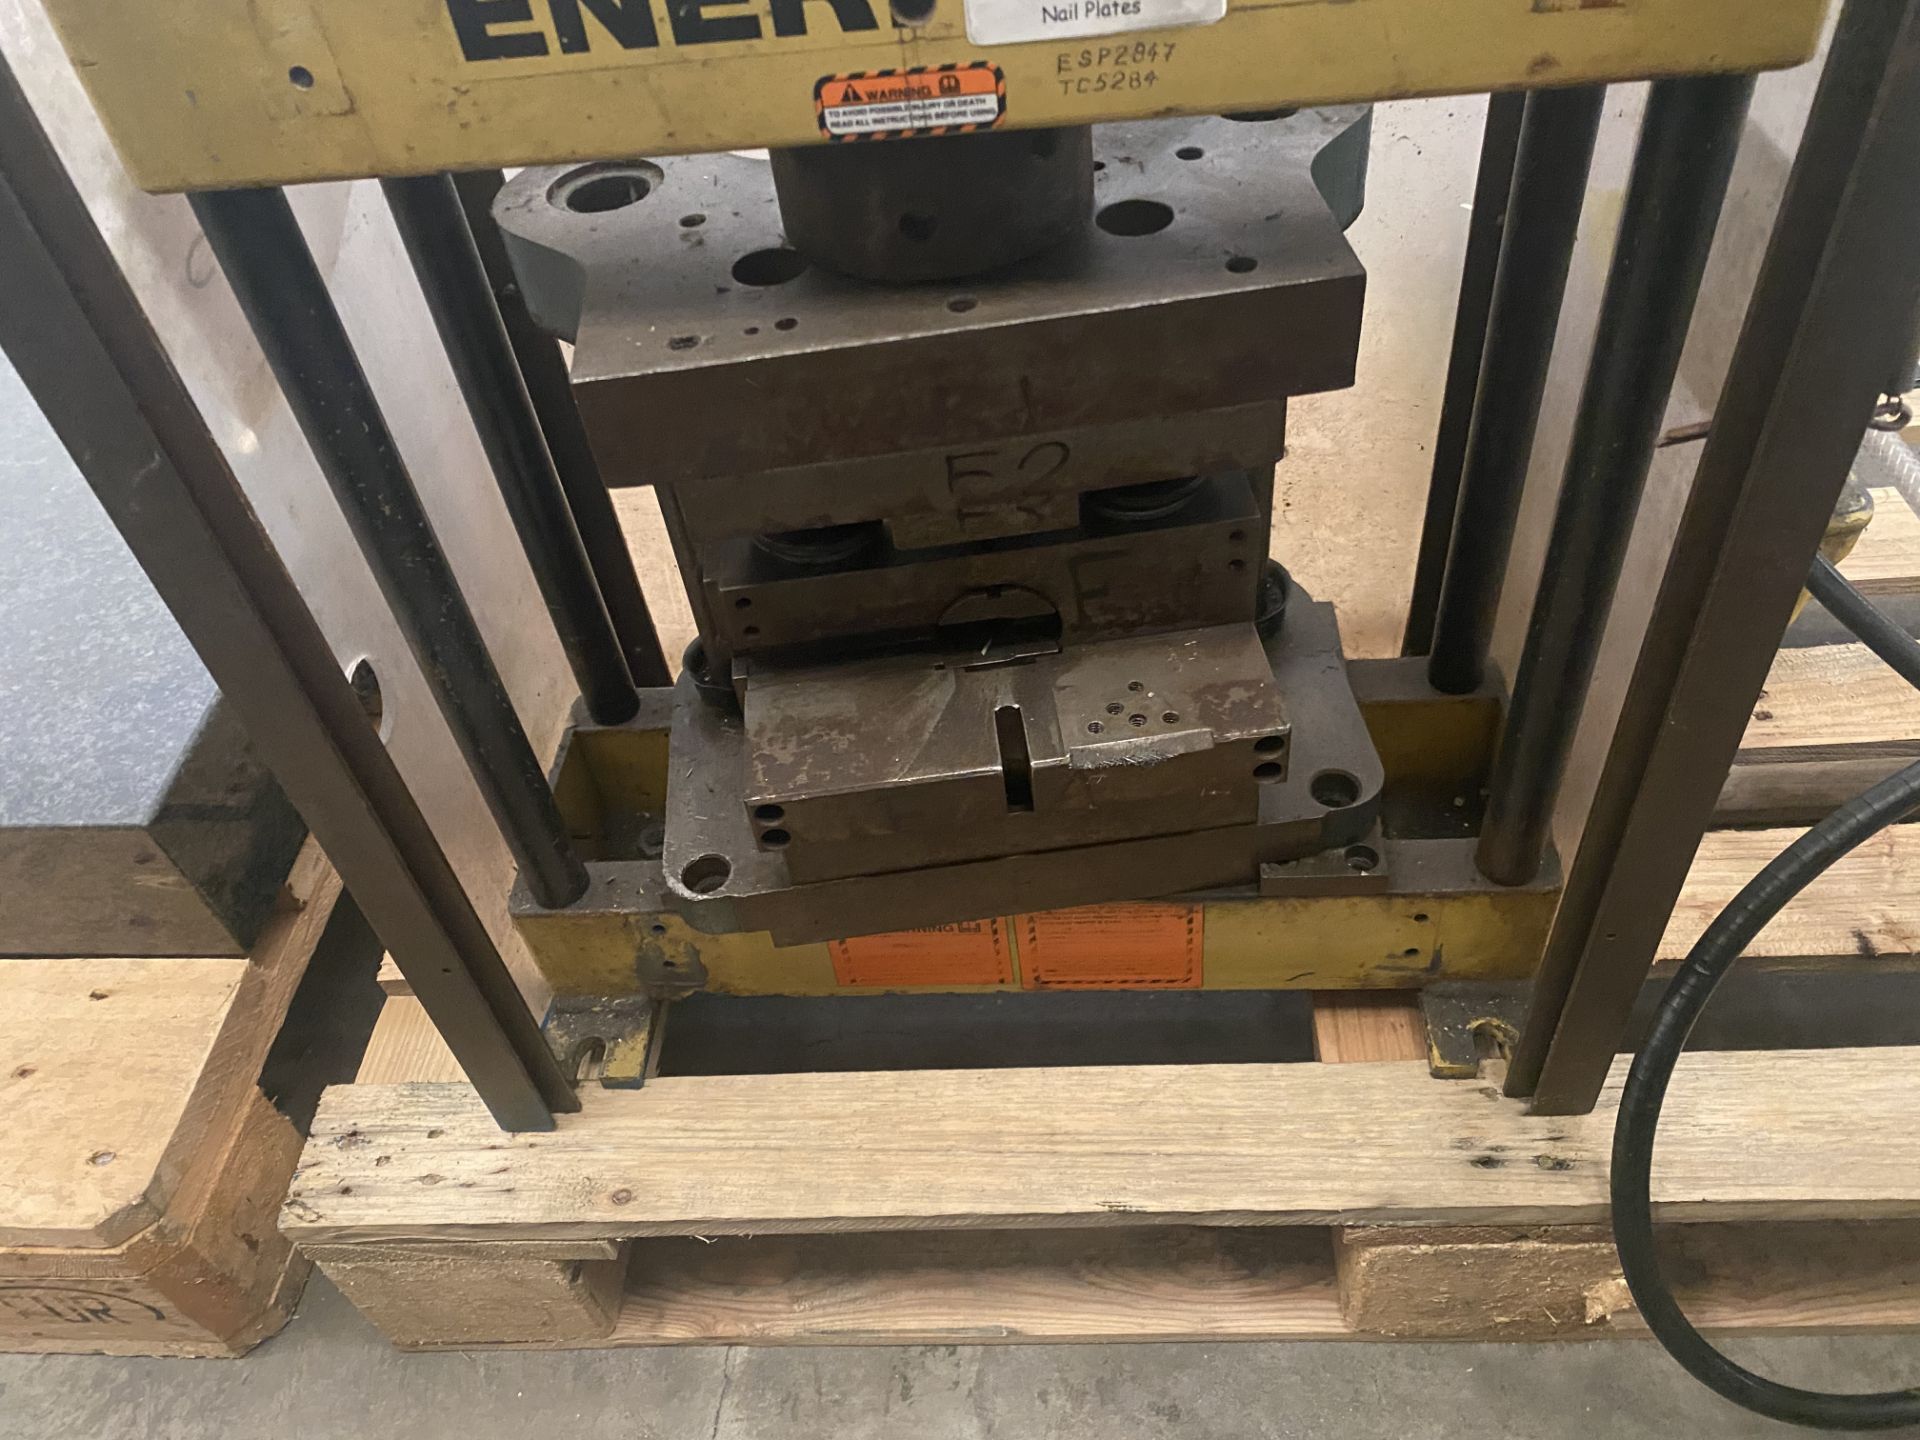 Enerpac Frame Hydraulic Press, free loading onto purchasers transport - Yes, item located at - Image 3 of 5